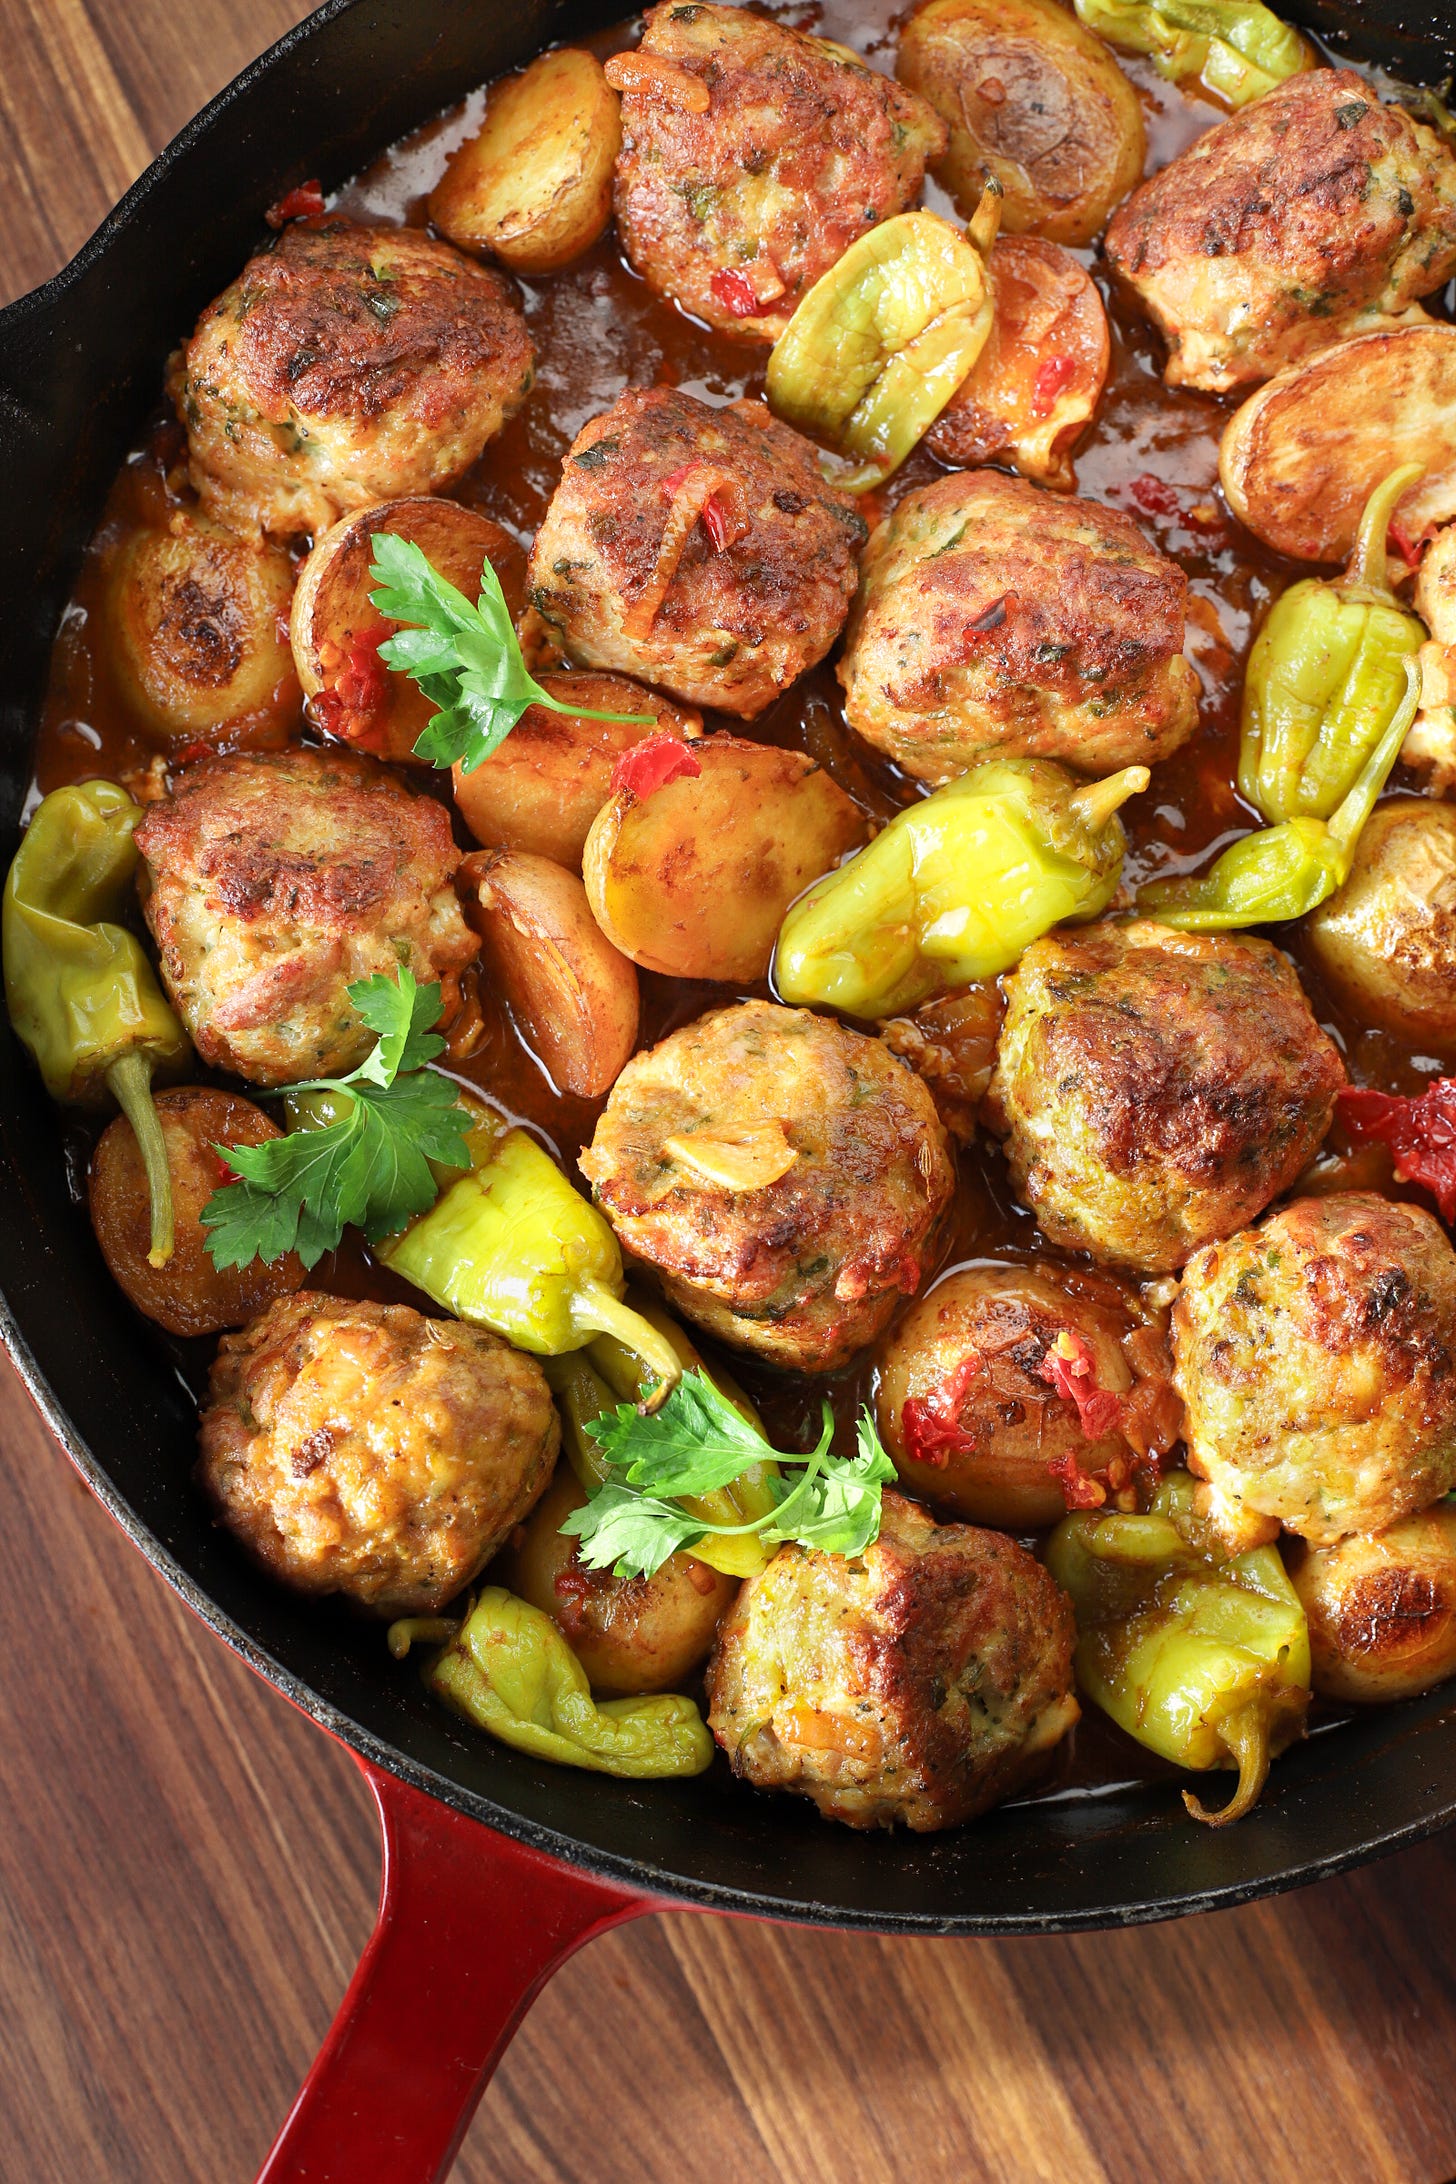 Skillet with meatballs, pepperoncini, and potatoes in a spicy sauce